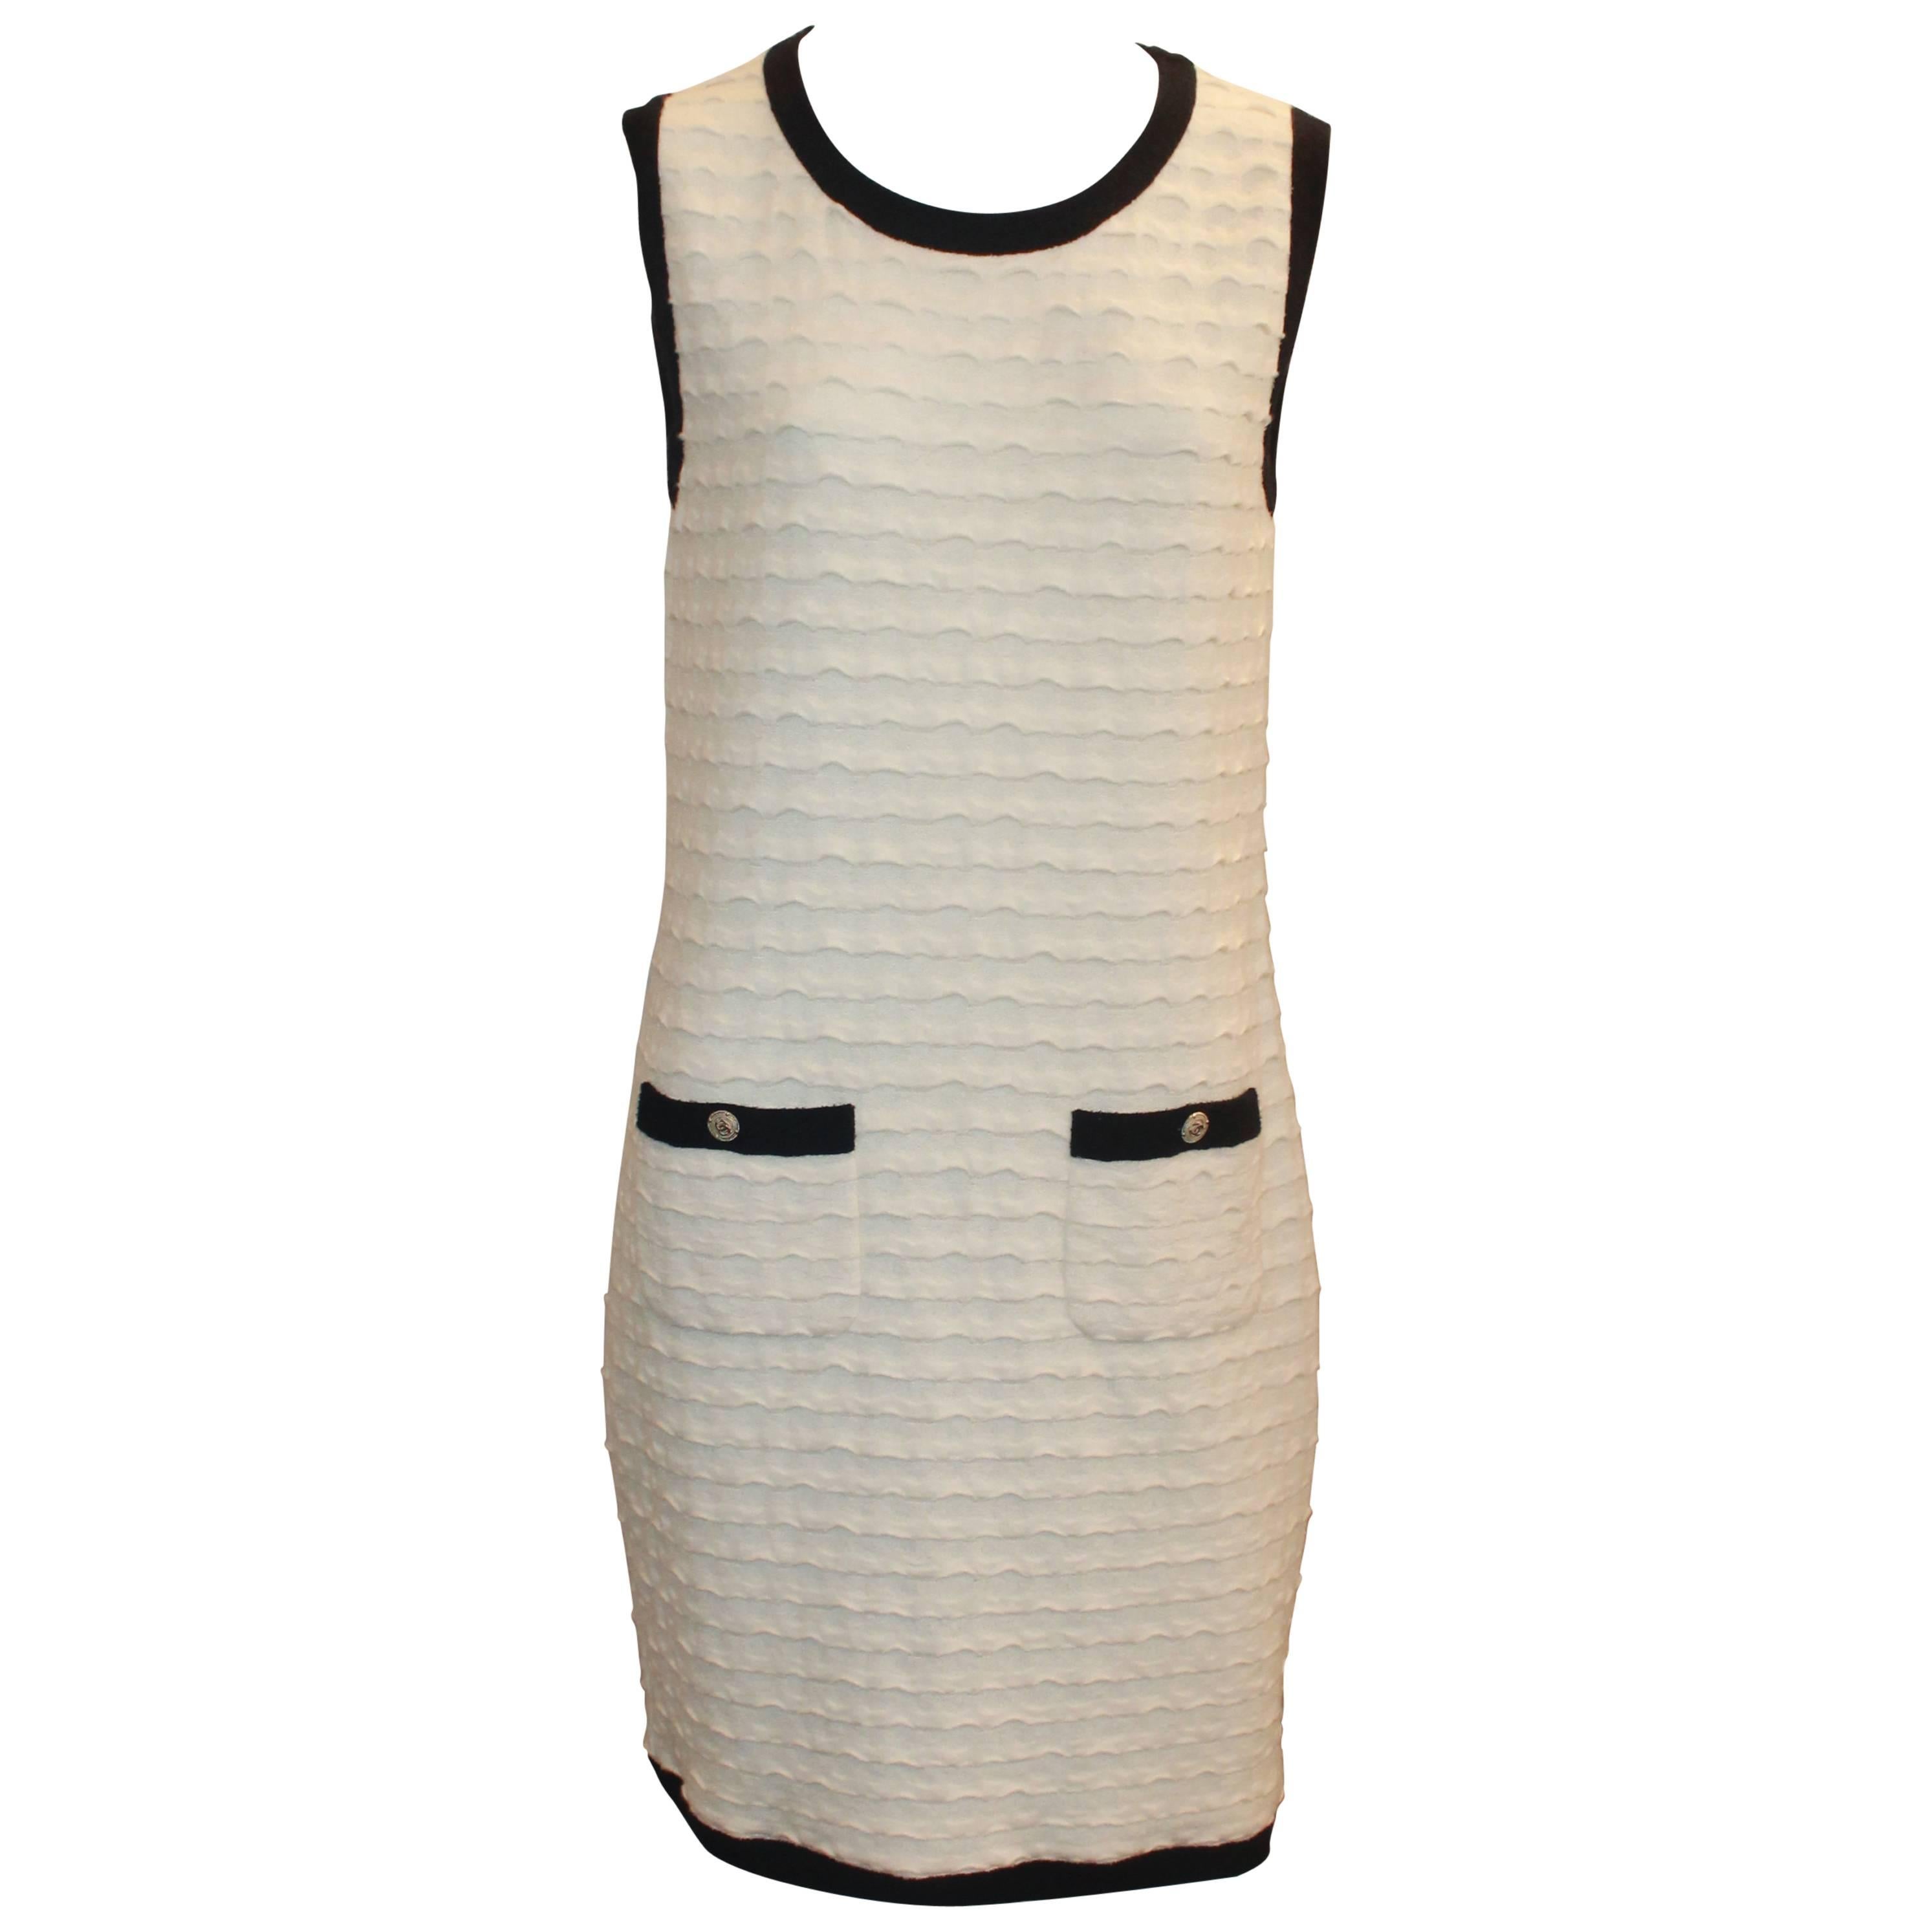 Chanel Ivory Knit Shift Dress with Navy Trim and Pockets - Size 38 